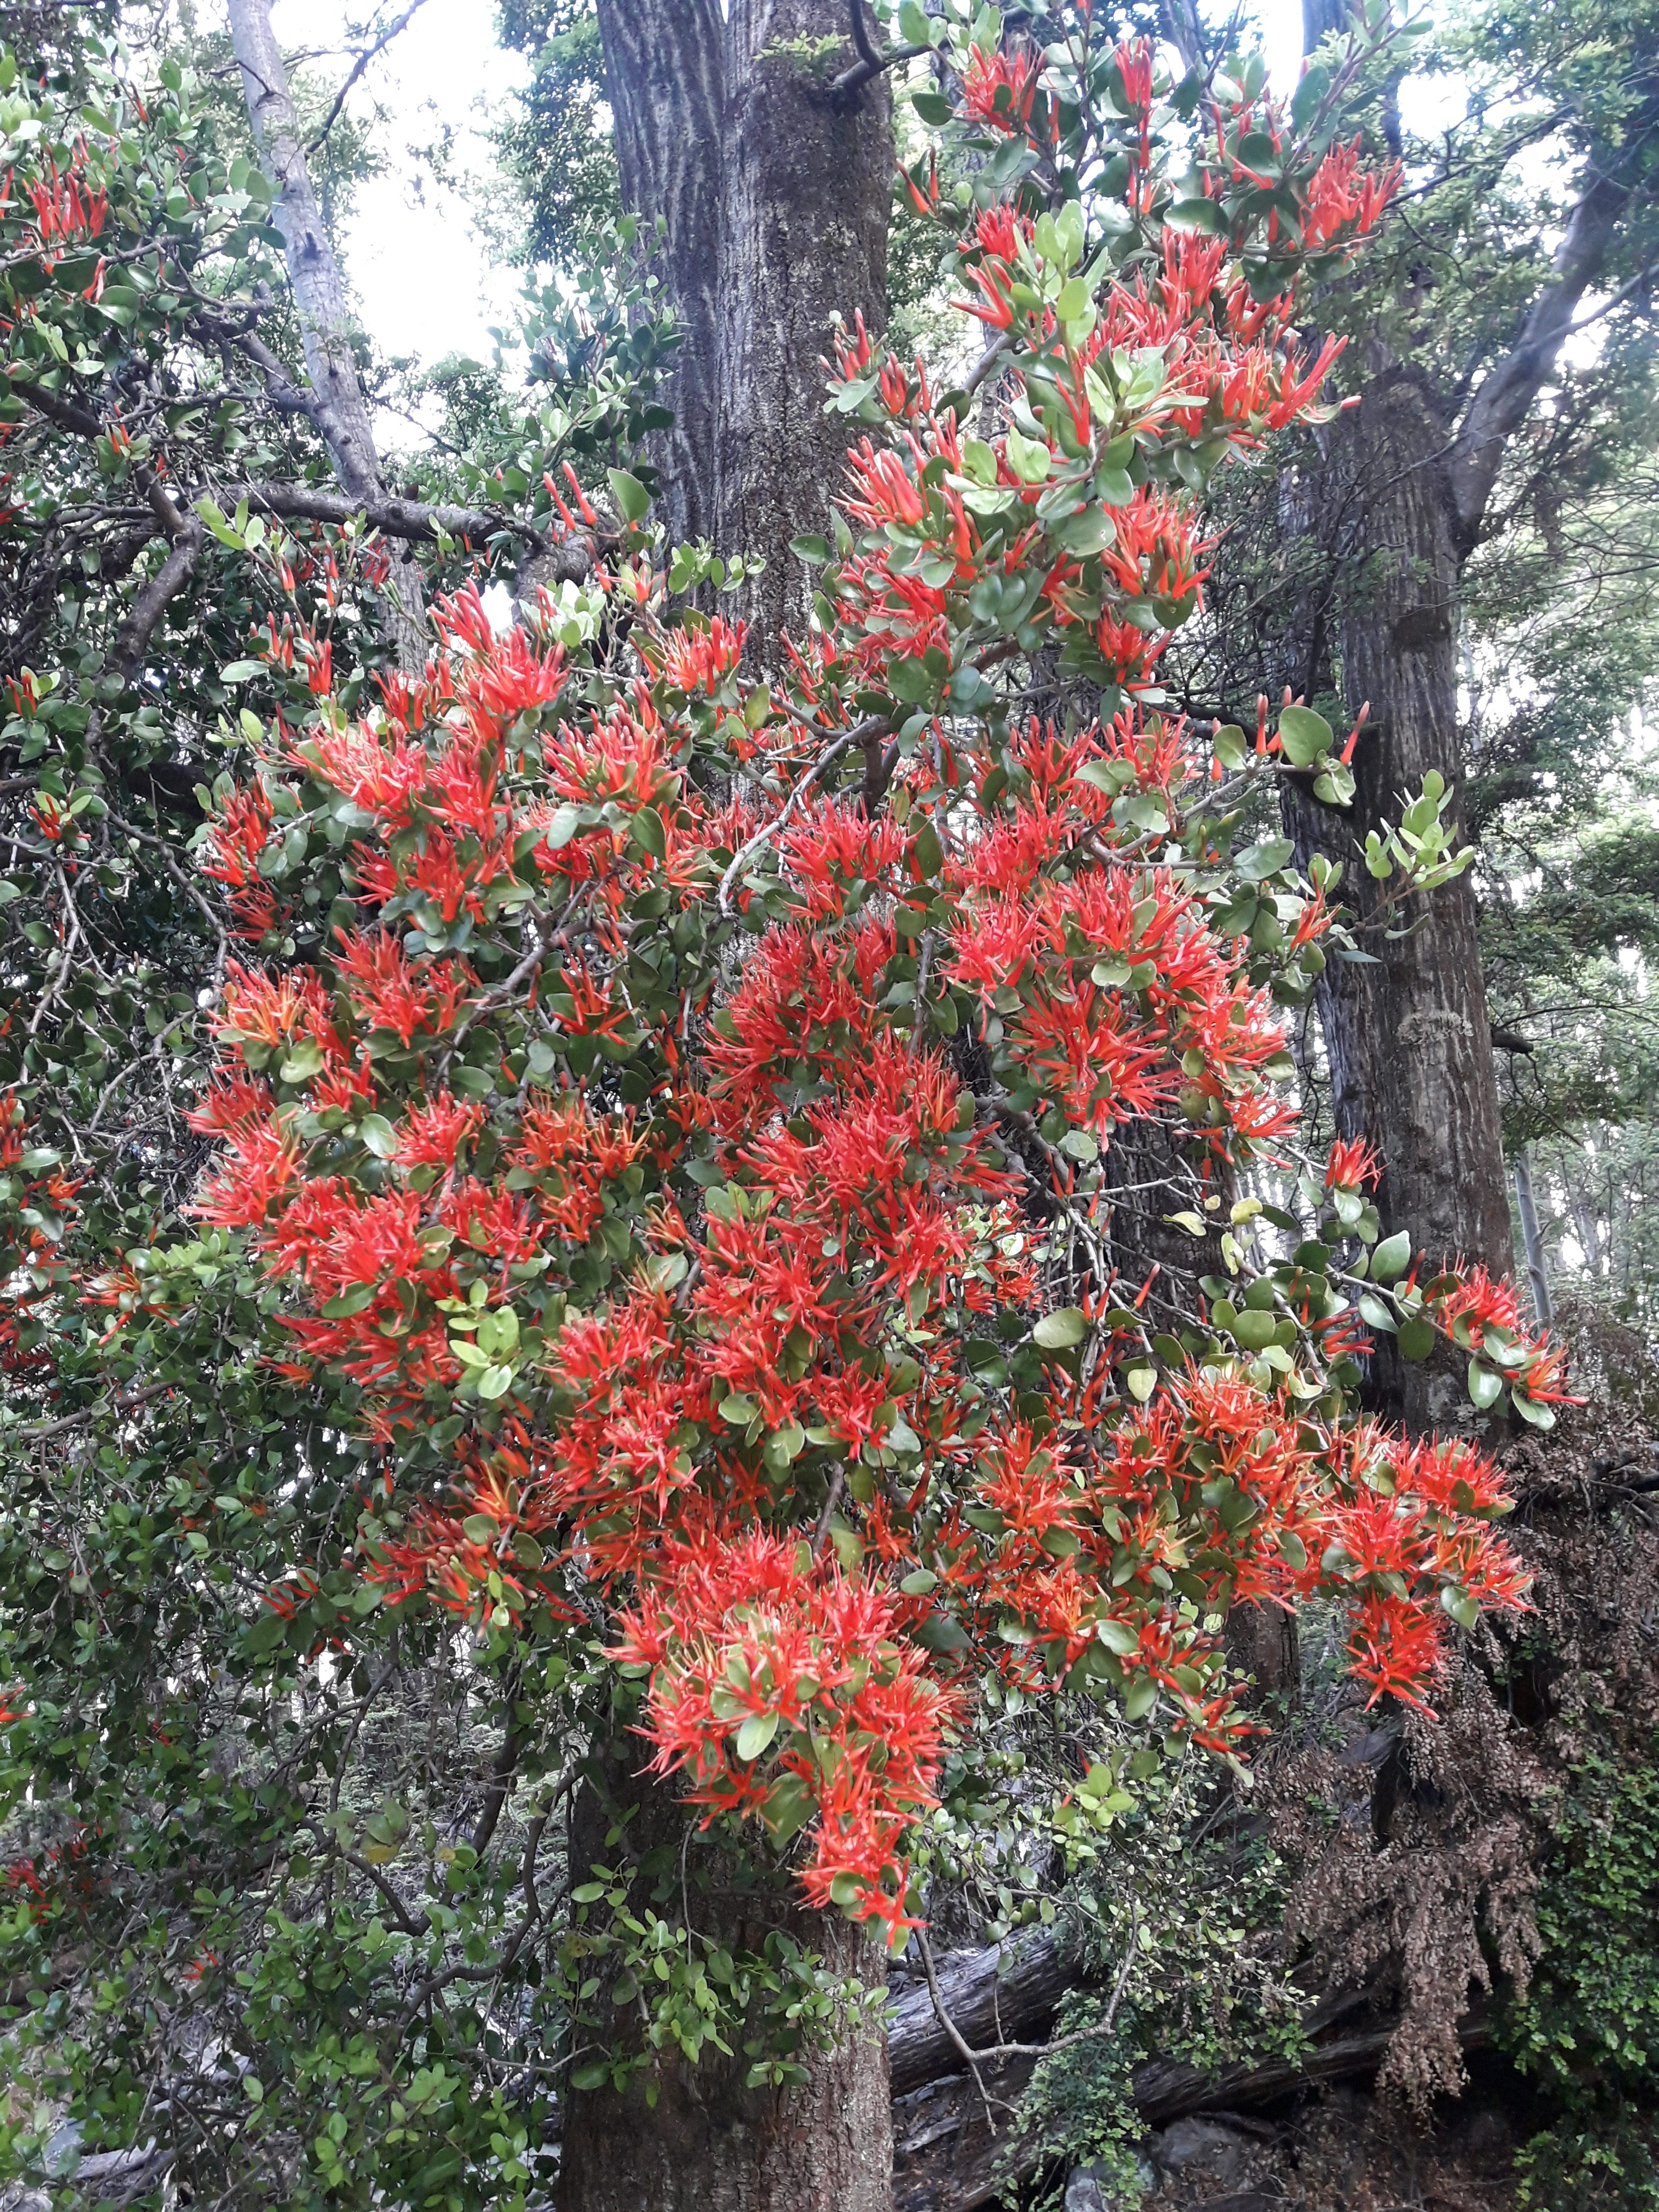 Red flowers like bottlebrush or pōhutukawa growing up the side of a tree.